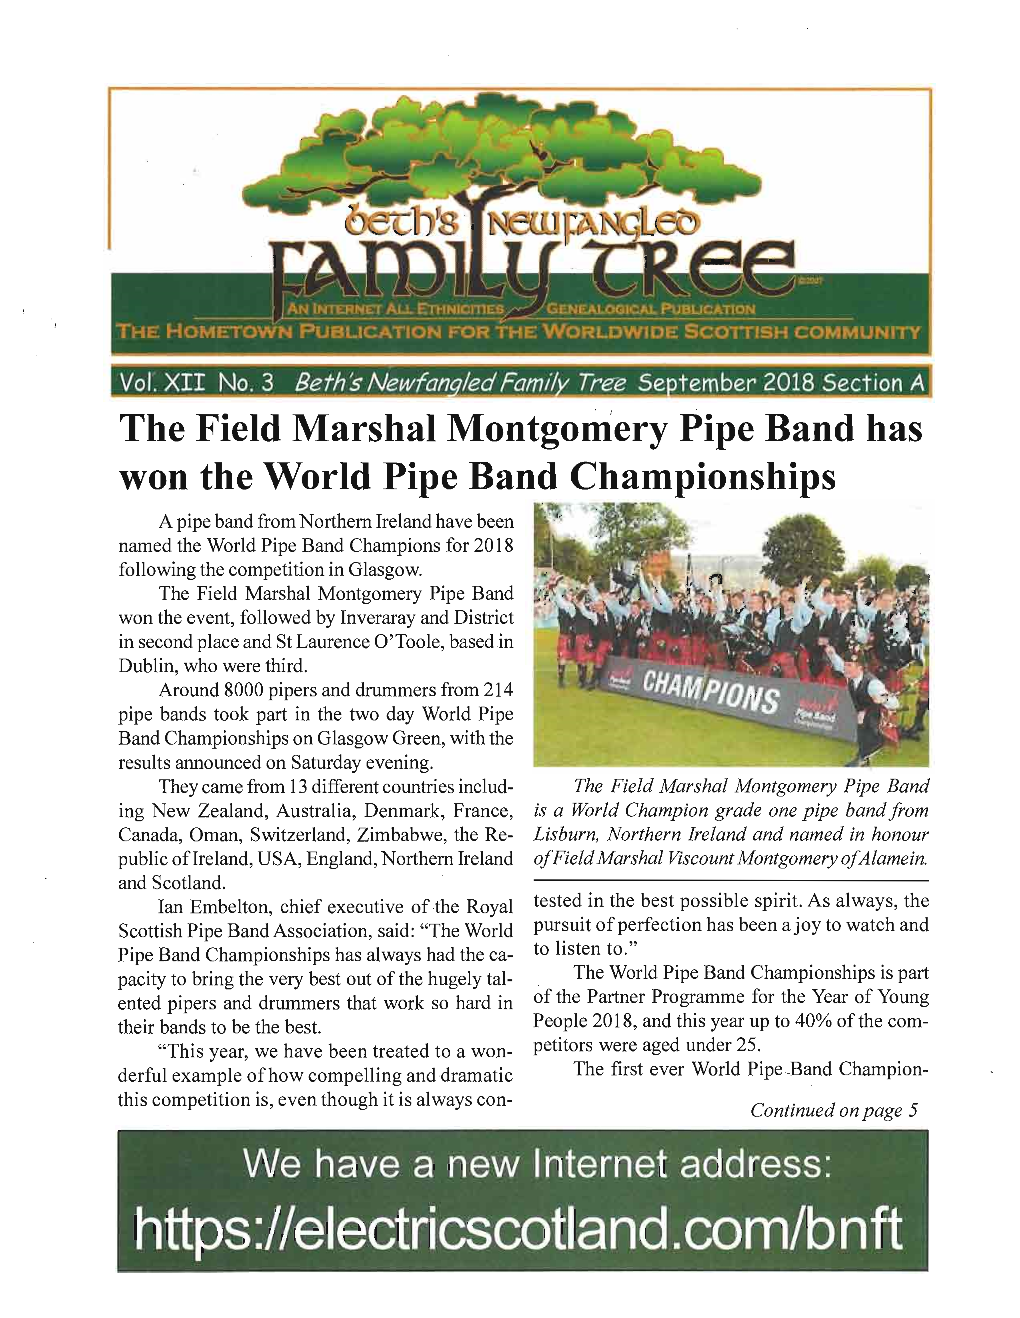 The Field Marshal Montgomery Pipe Band